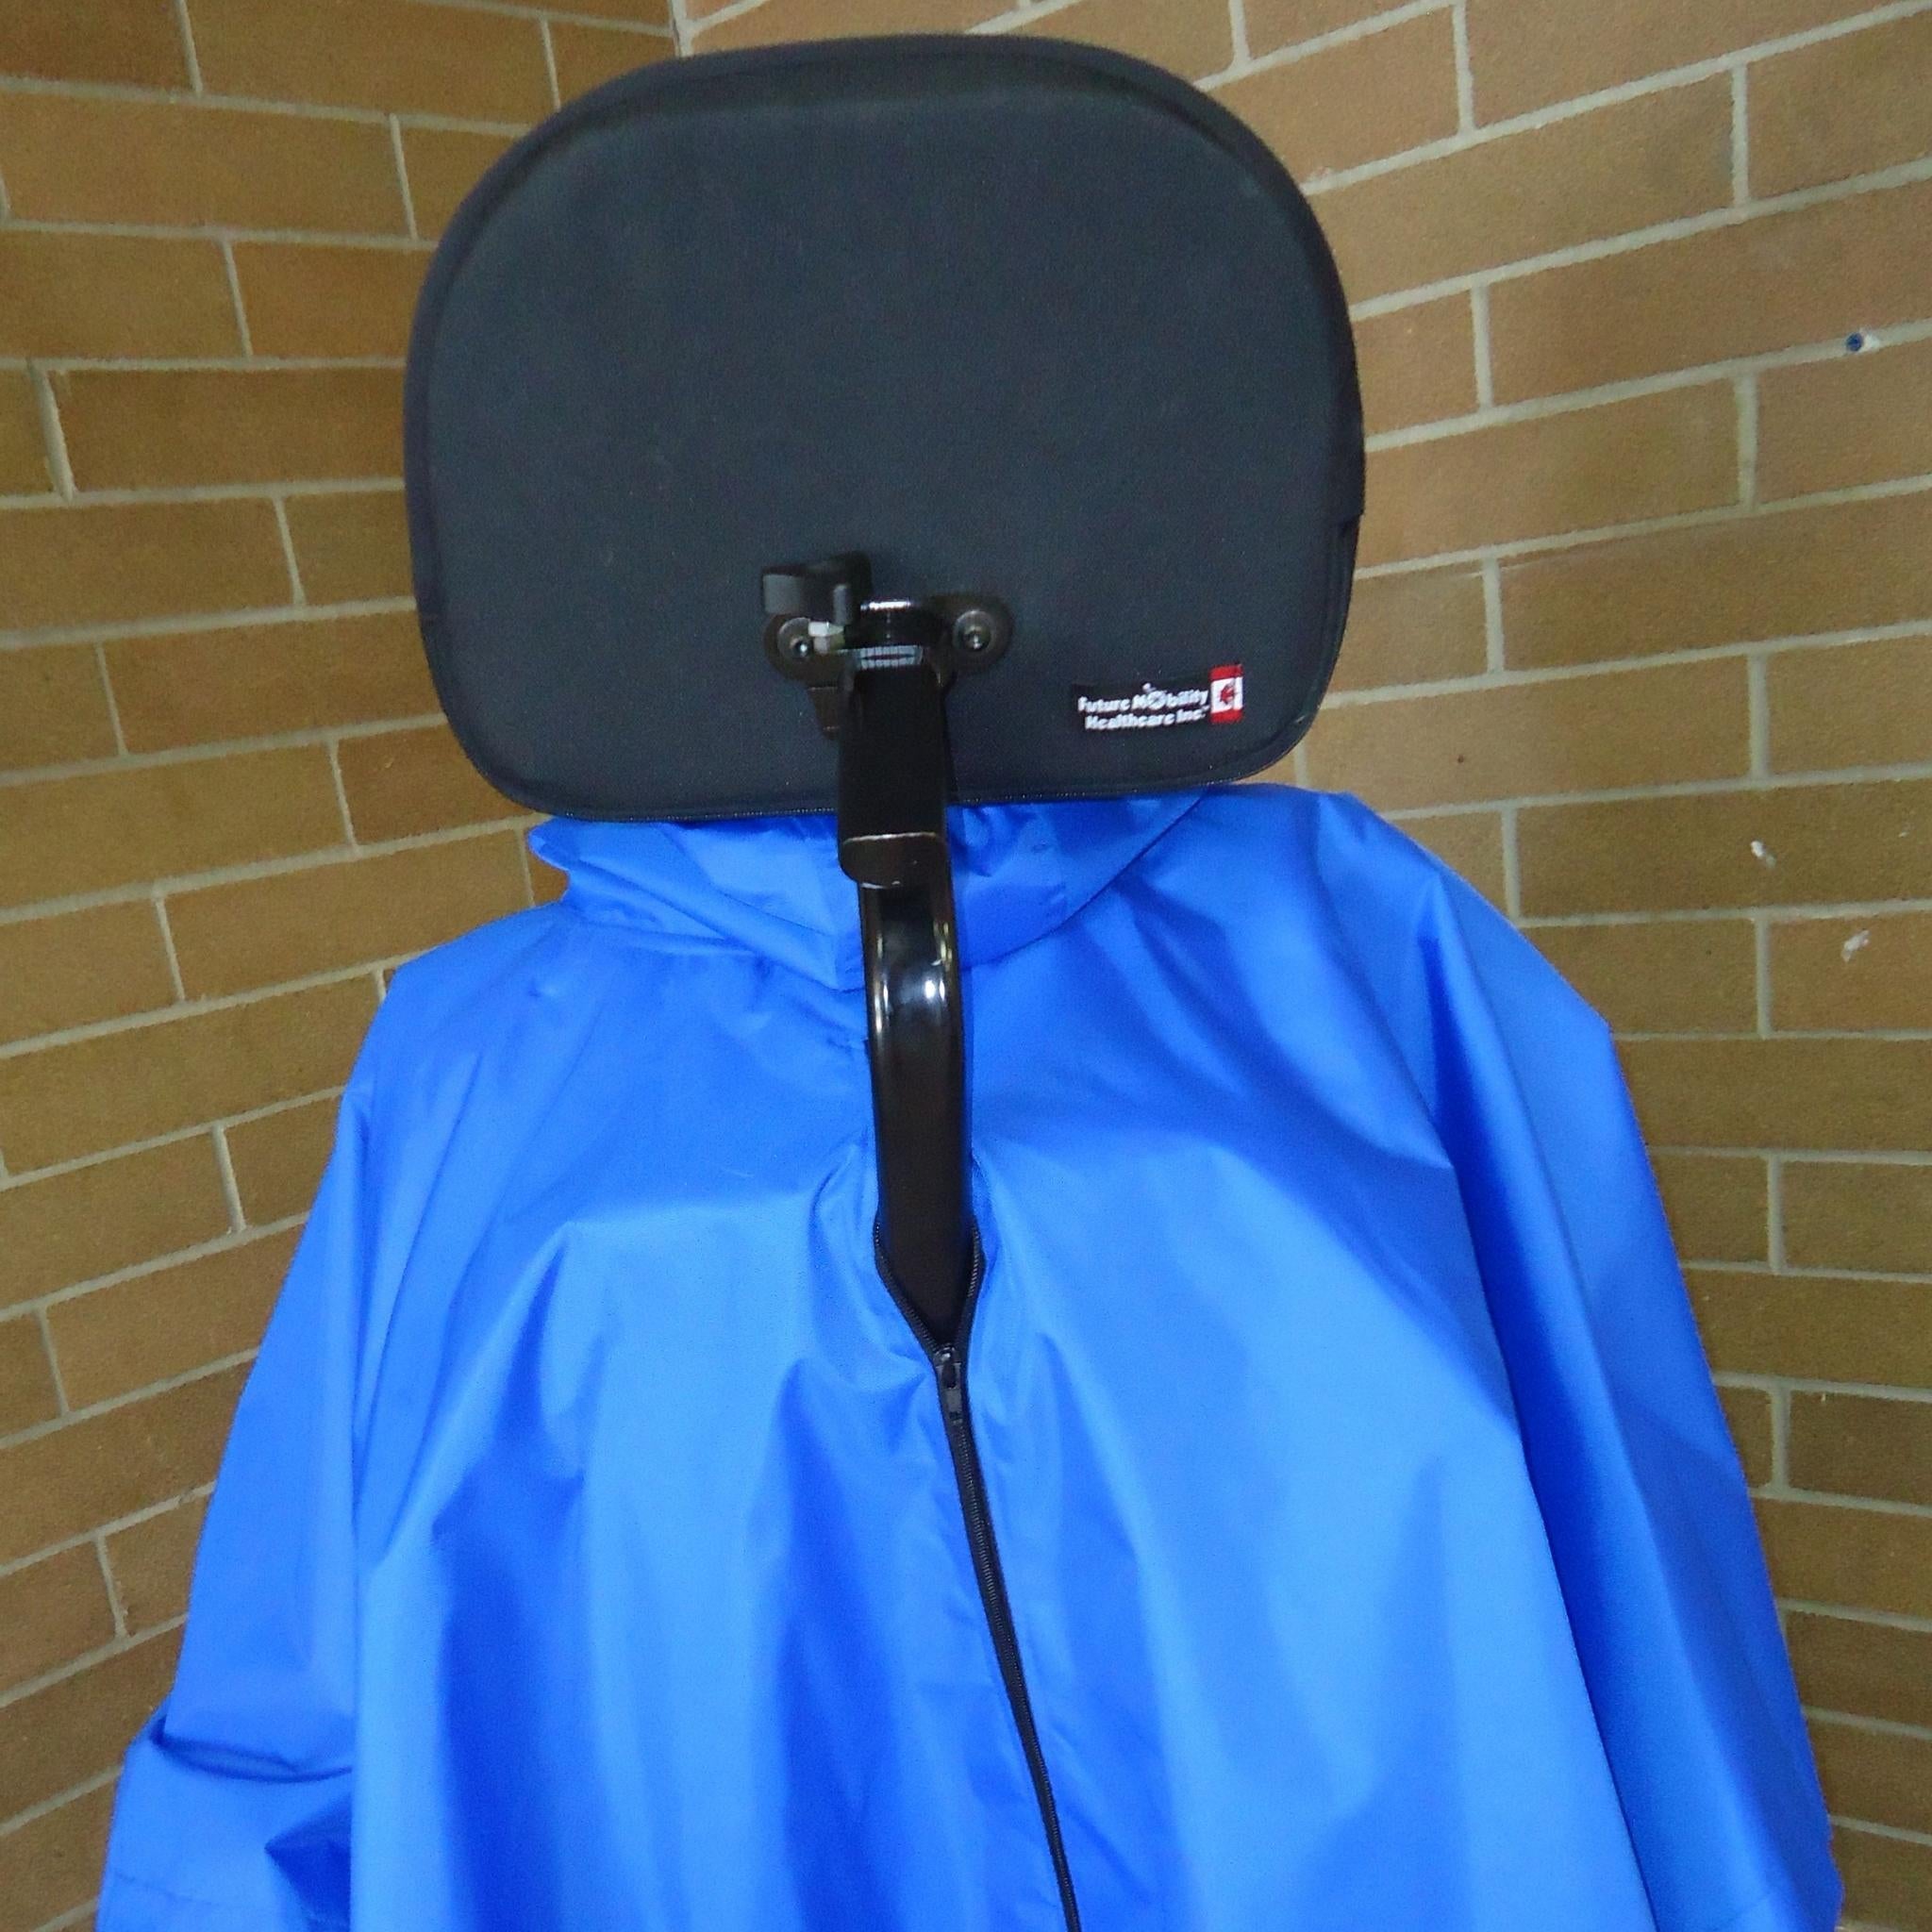 3 in 1 Adaptive Poncho with Seperating Layers-Designed for use with Wheelchairs, Scooters